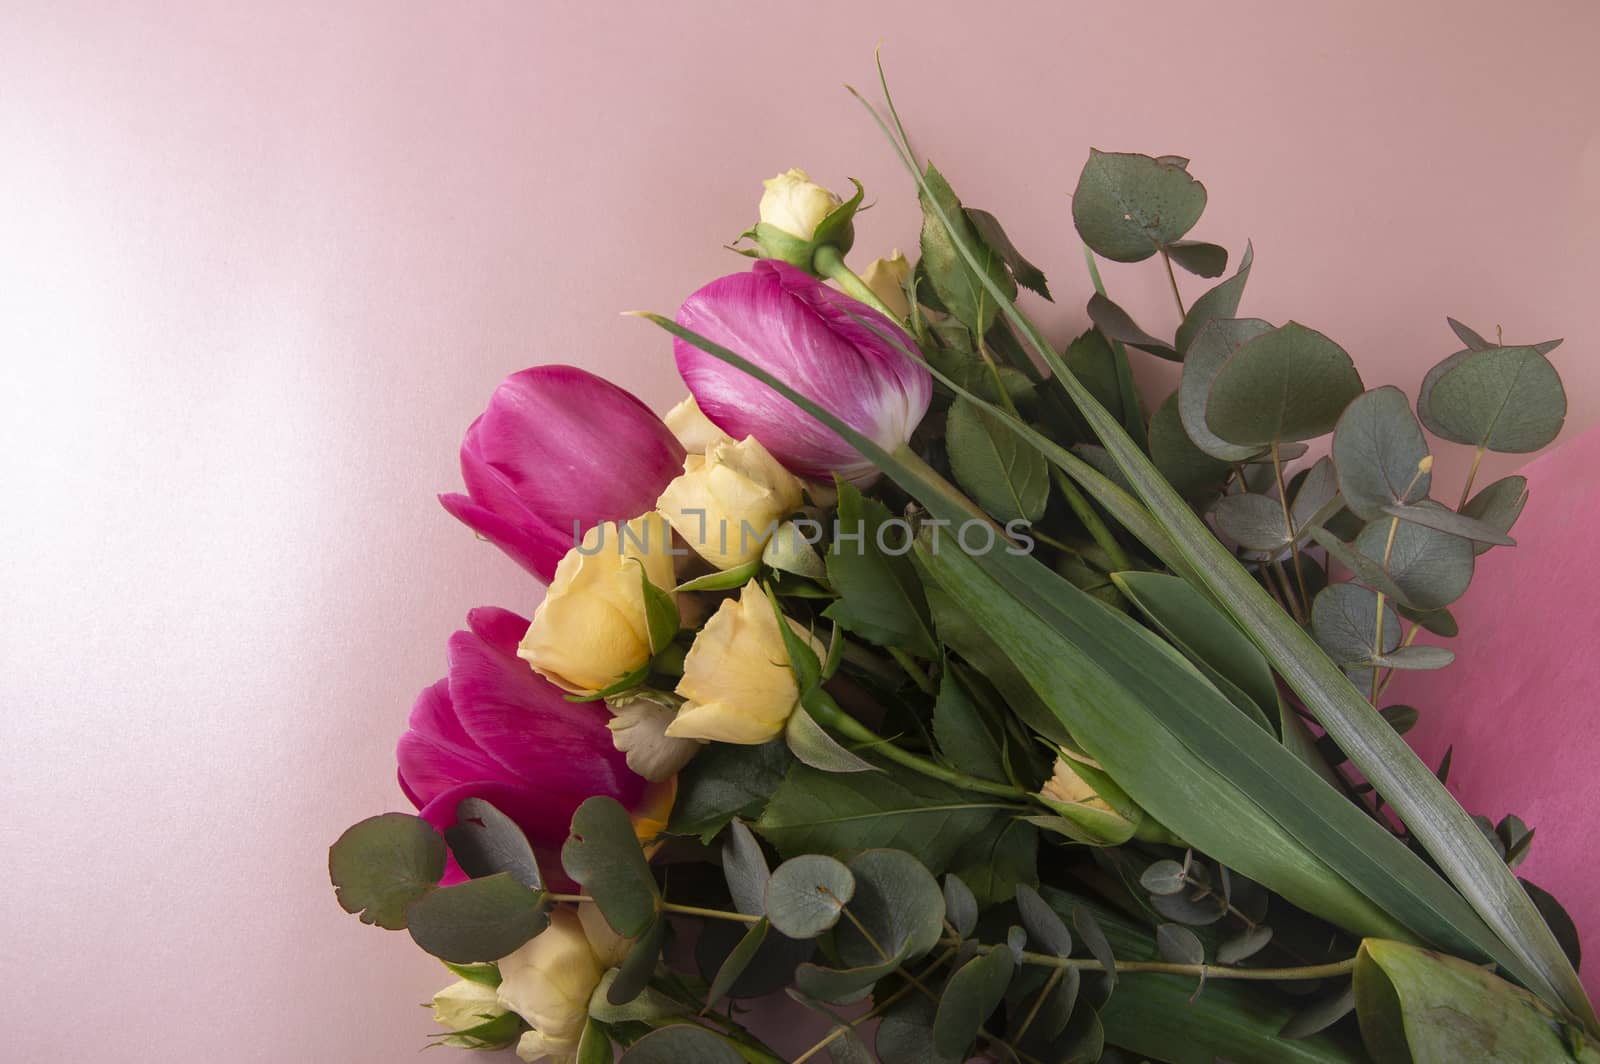 Flat lay flower arrangement with roses and tulips on a pink background top view by claire_lucia